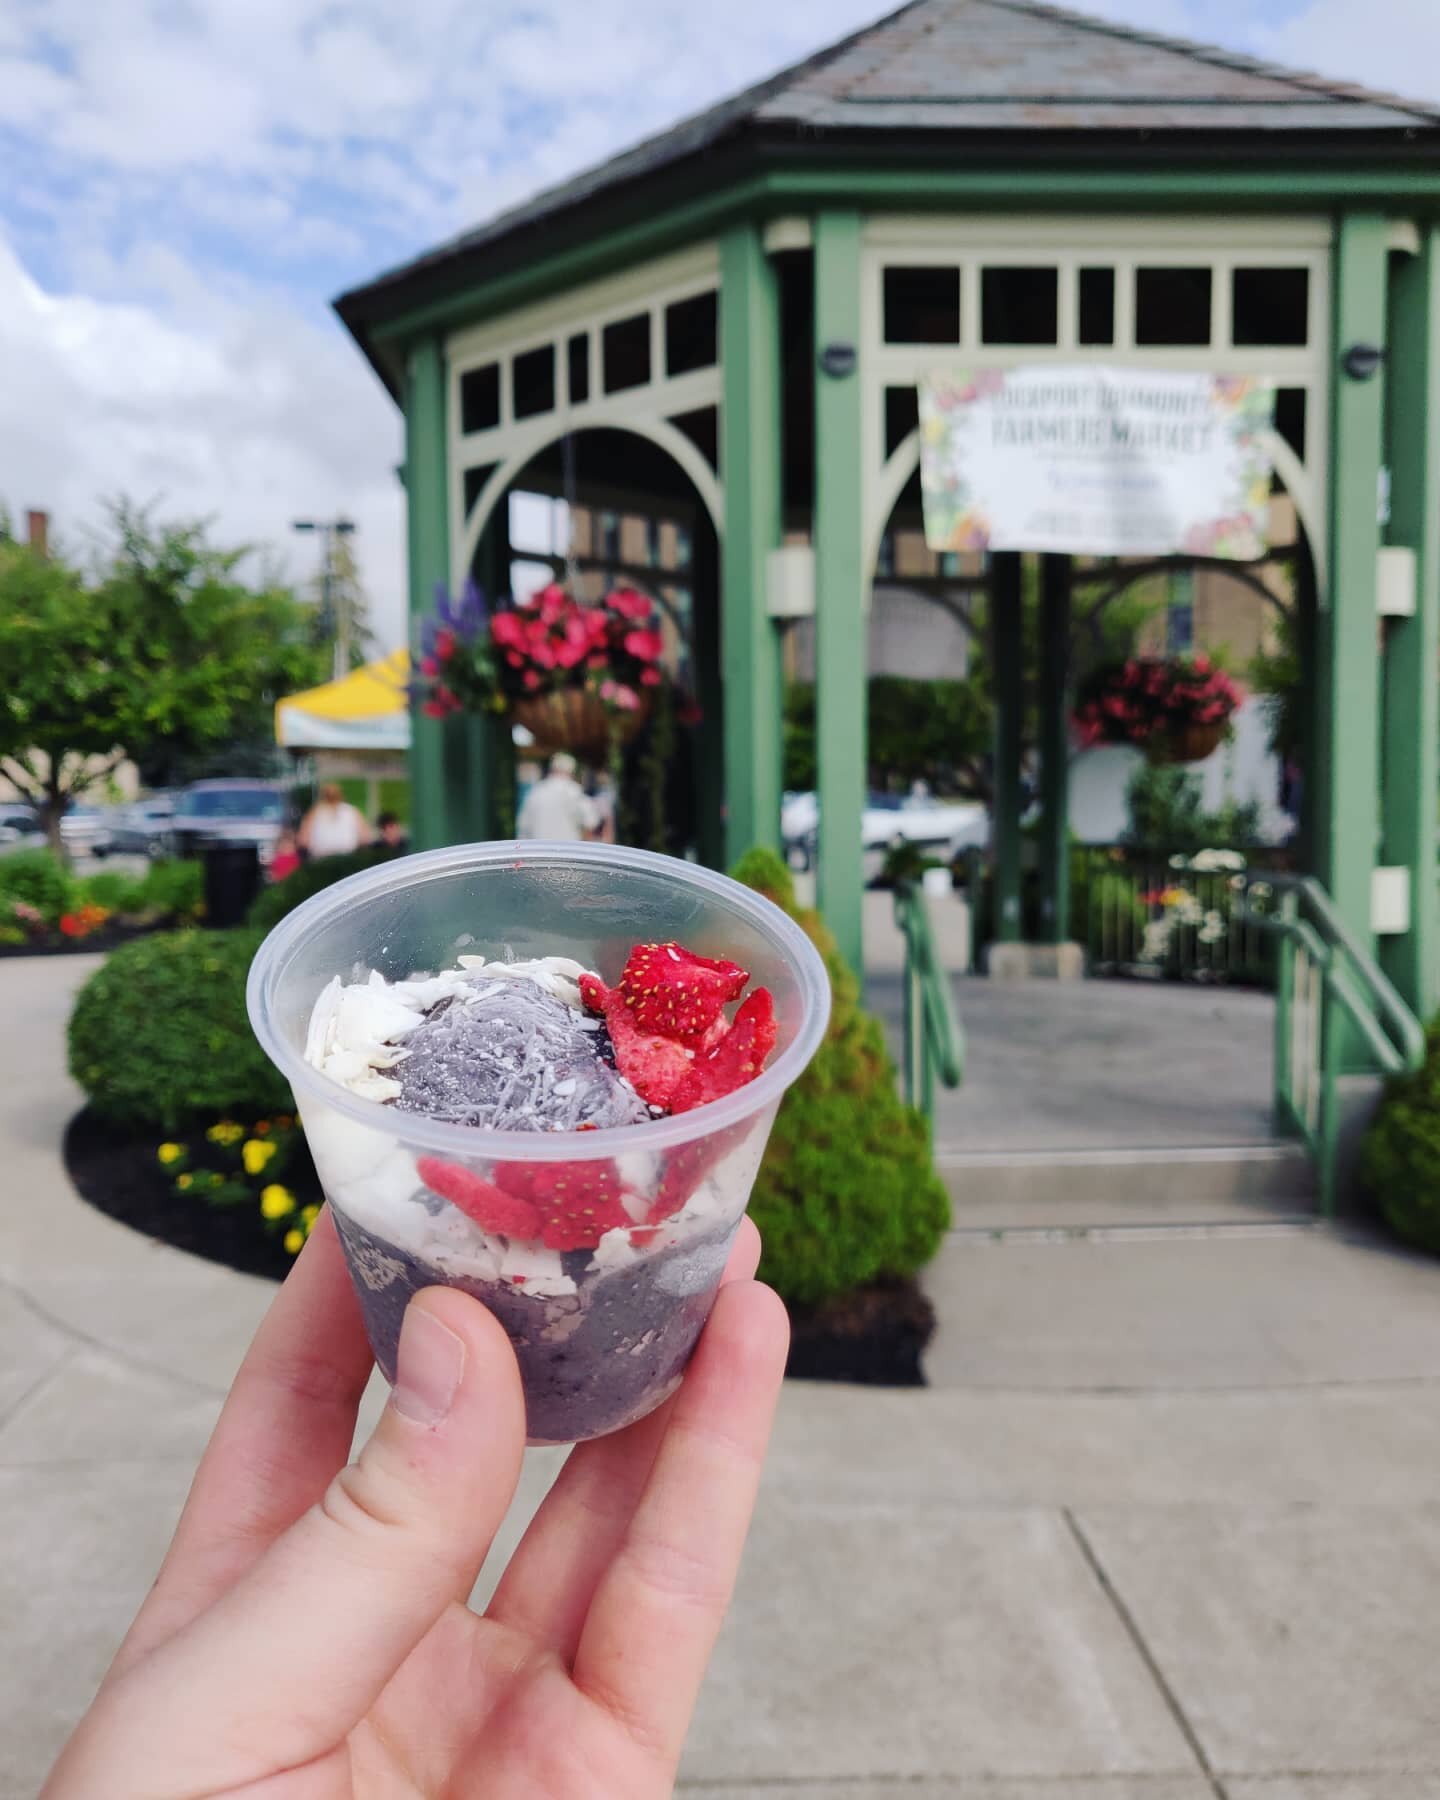 What better way to celebrate 4th of July than with Red, White, and Blueberry gelato?? Made with goats milk, blueberry puree, and topped with strawberries and coconut flakes. Available for a limited time at the Lockport Community market! 
&hearts;️🤍?